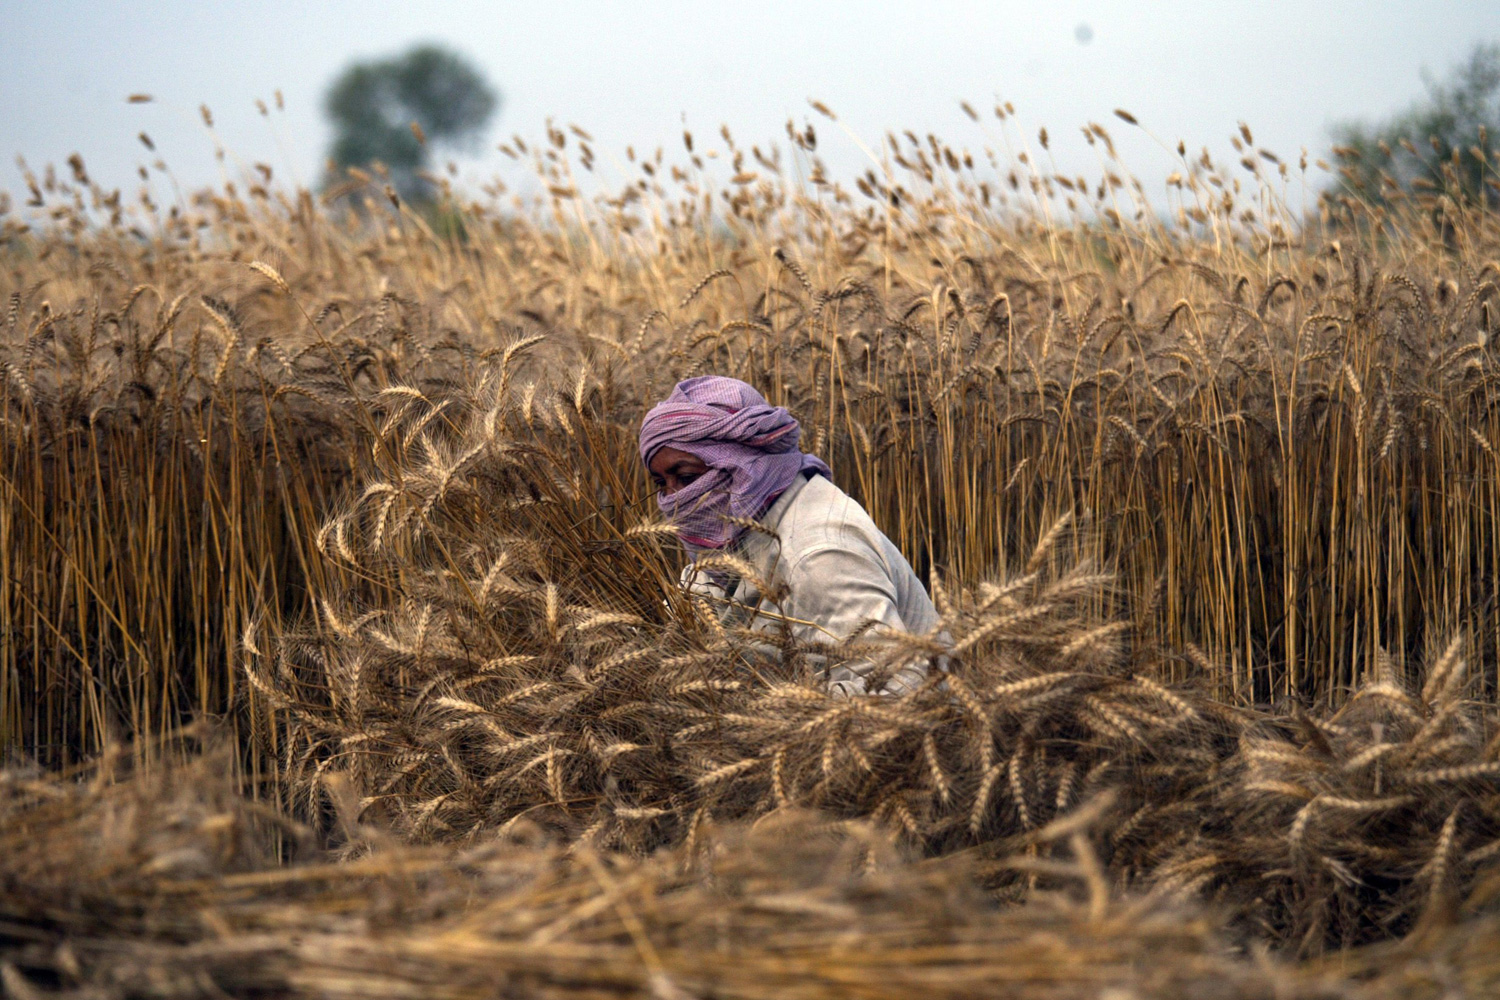 May 1, 2012. An Indian laborer harvests wheat produce in a wheat field at the village Pandori Ran Singh near the northern city of Amritsar, India.